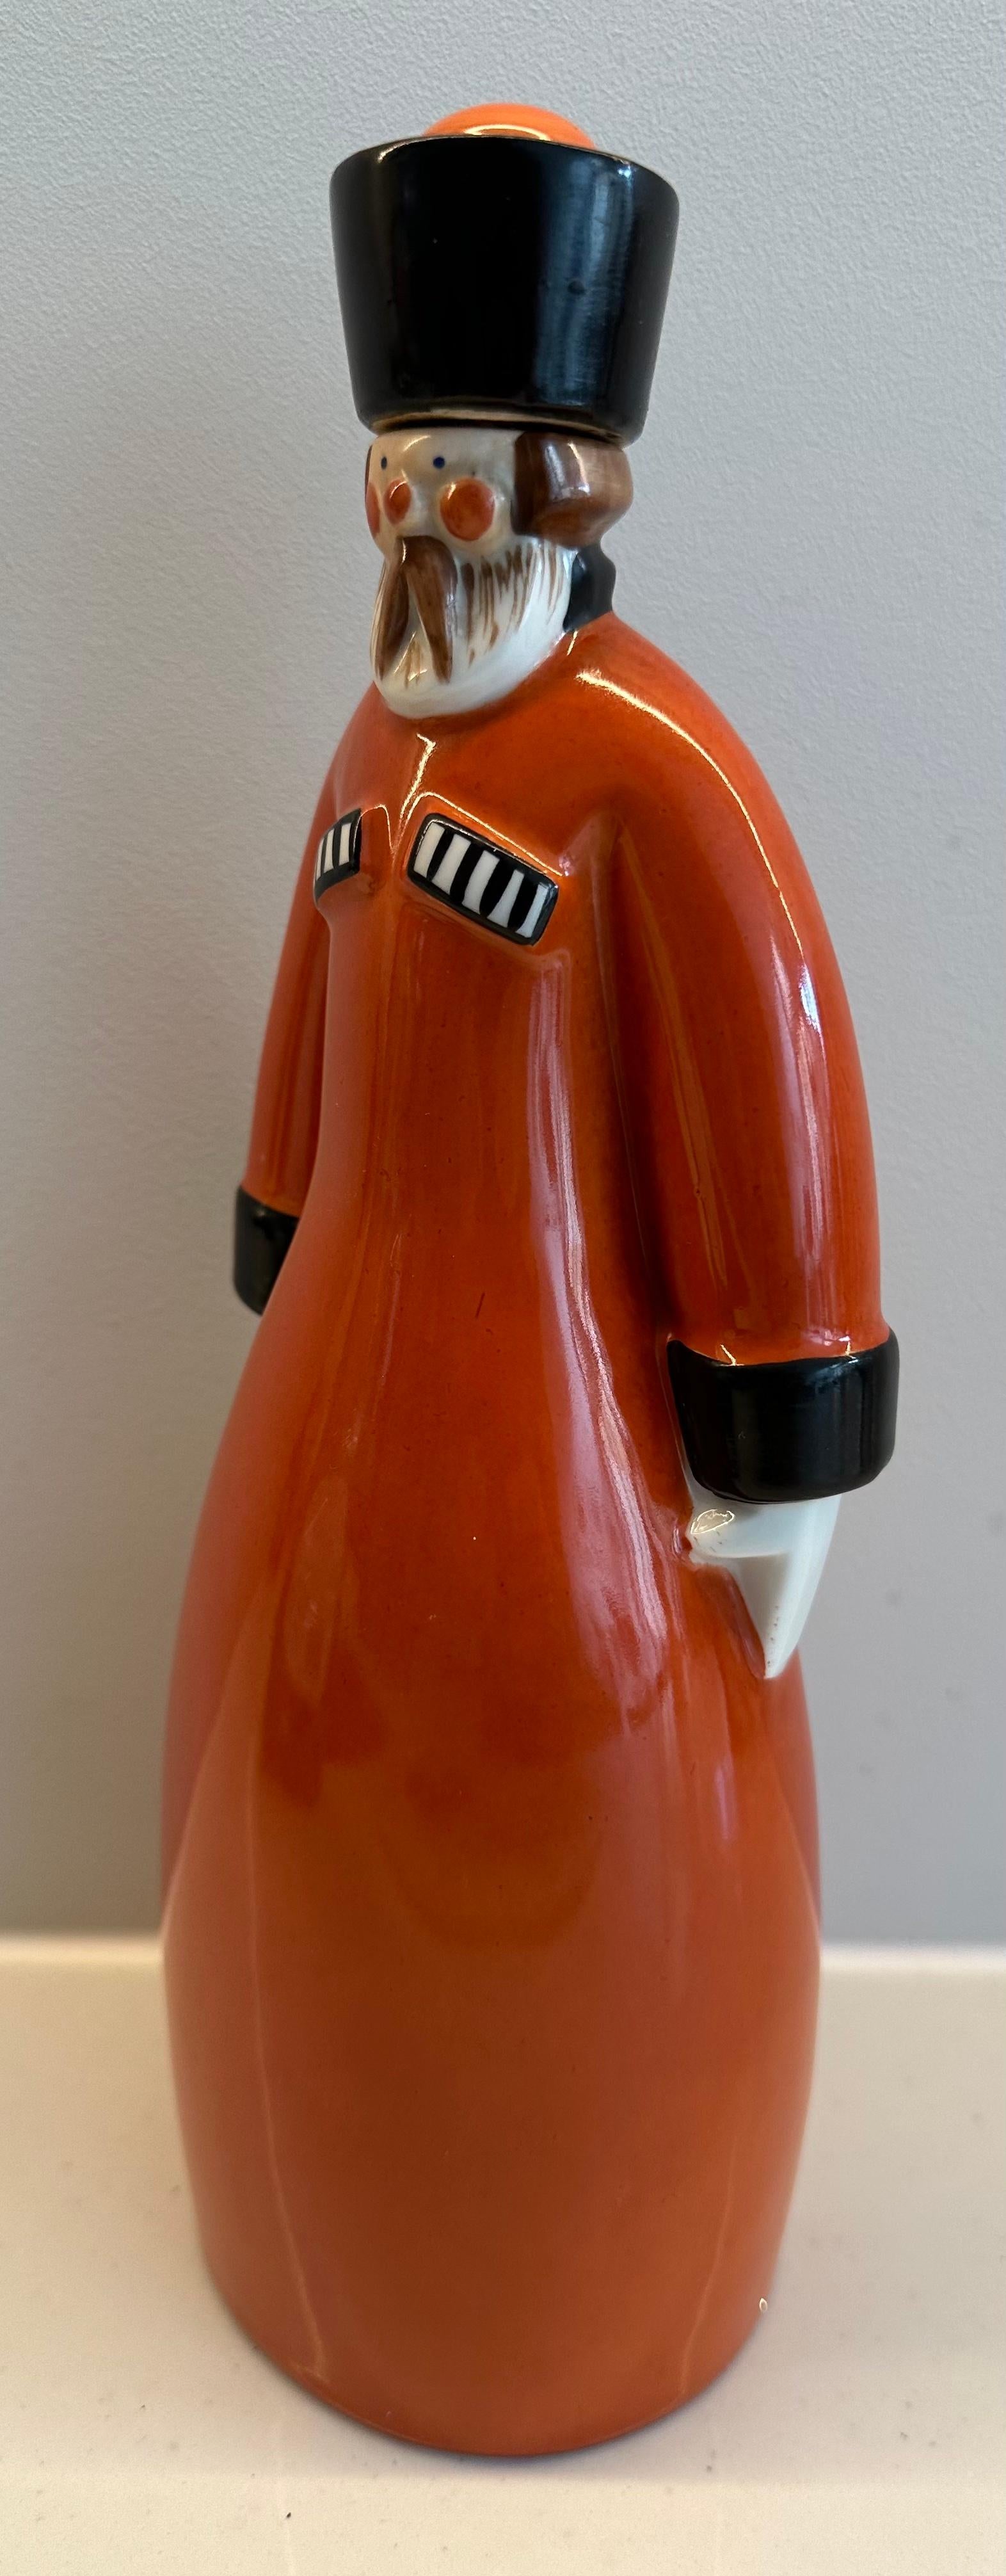 Art Deco 1930s French “Curacao” Figural Russian Soldier Flask by Robj Paris For Sale 8